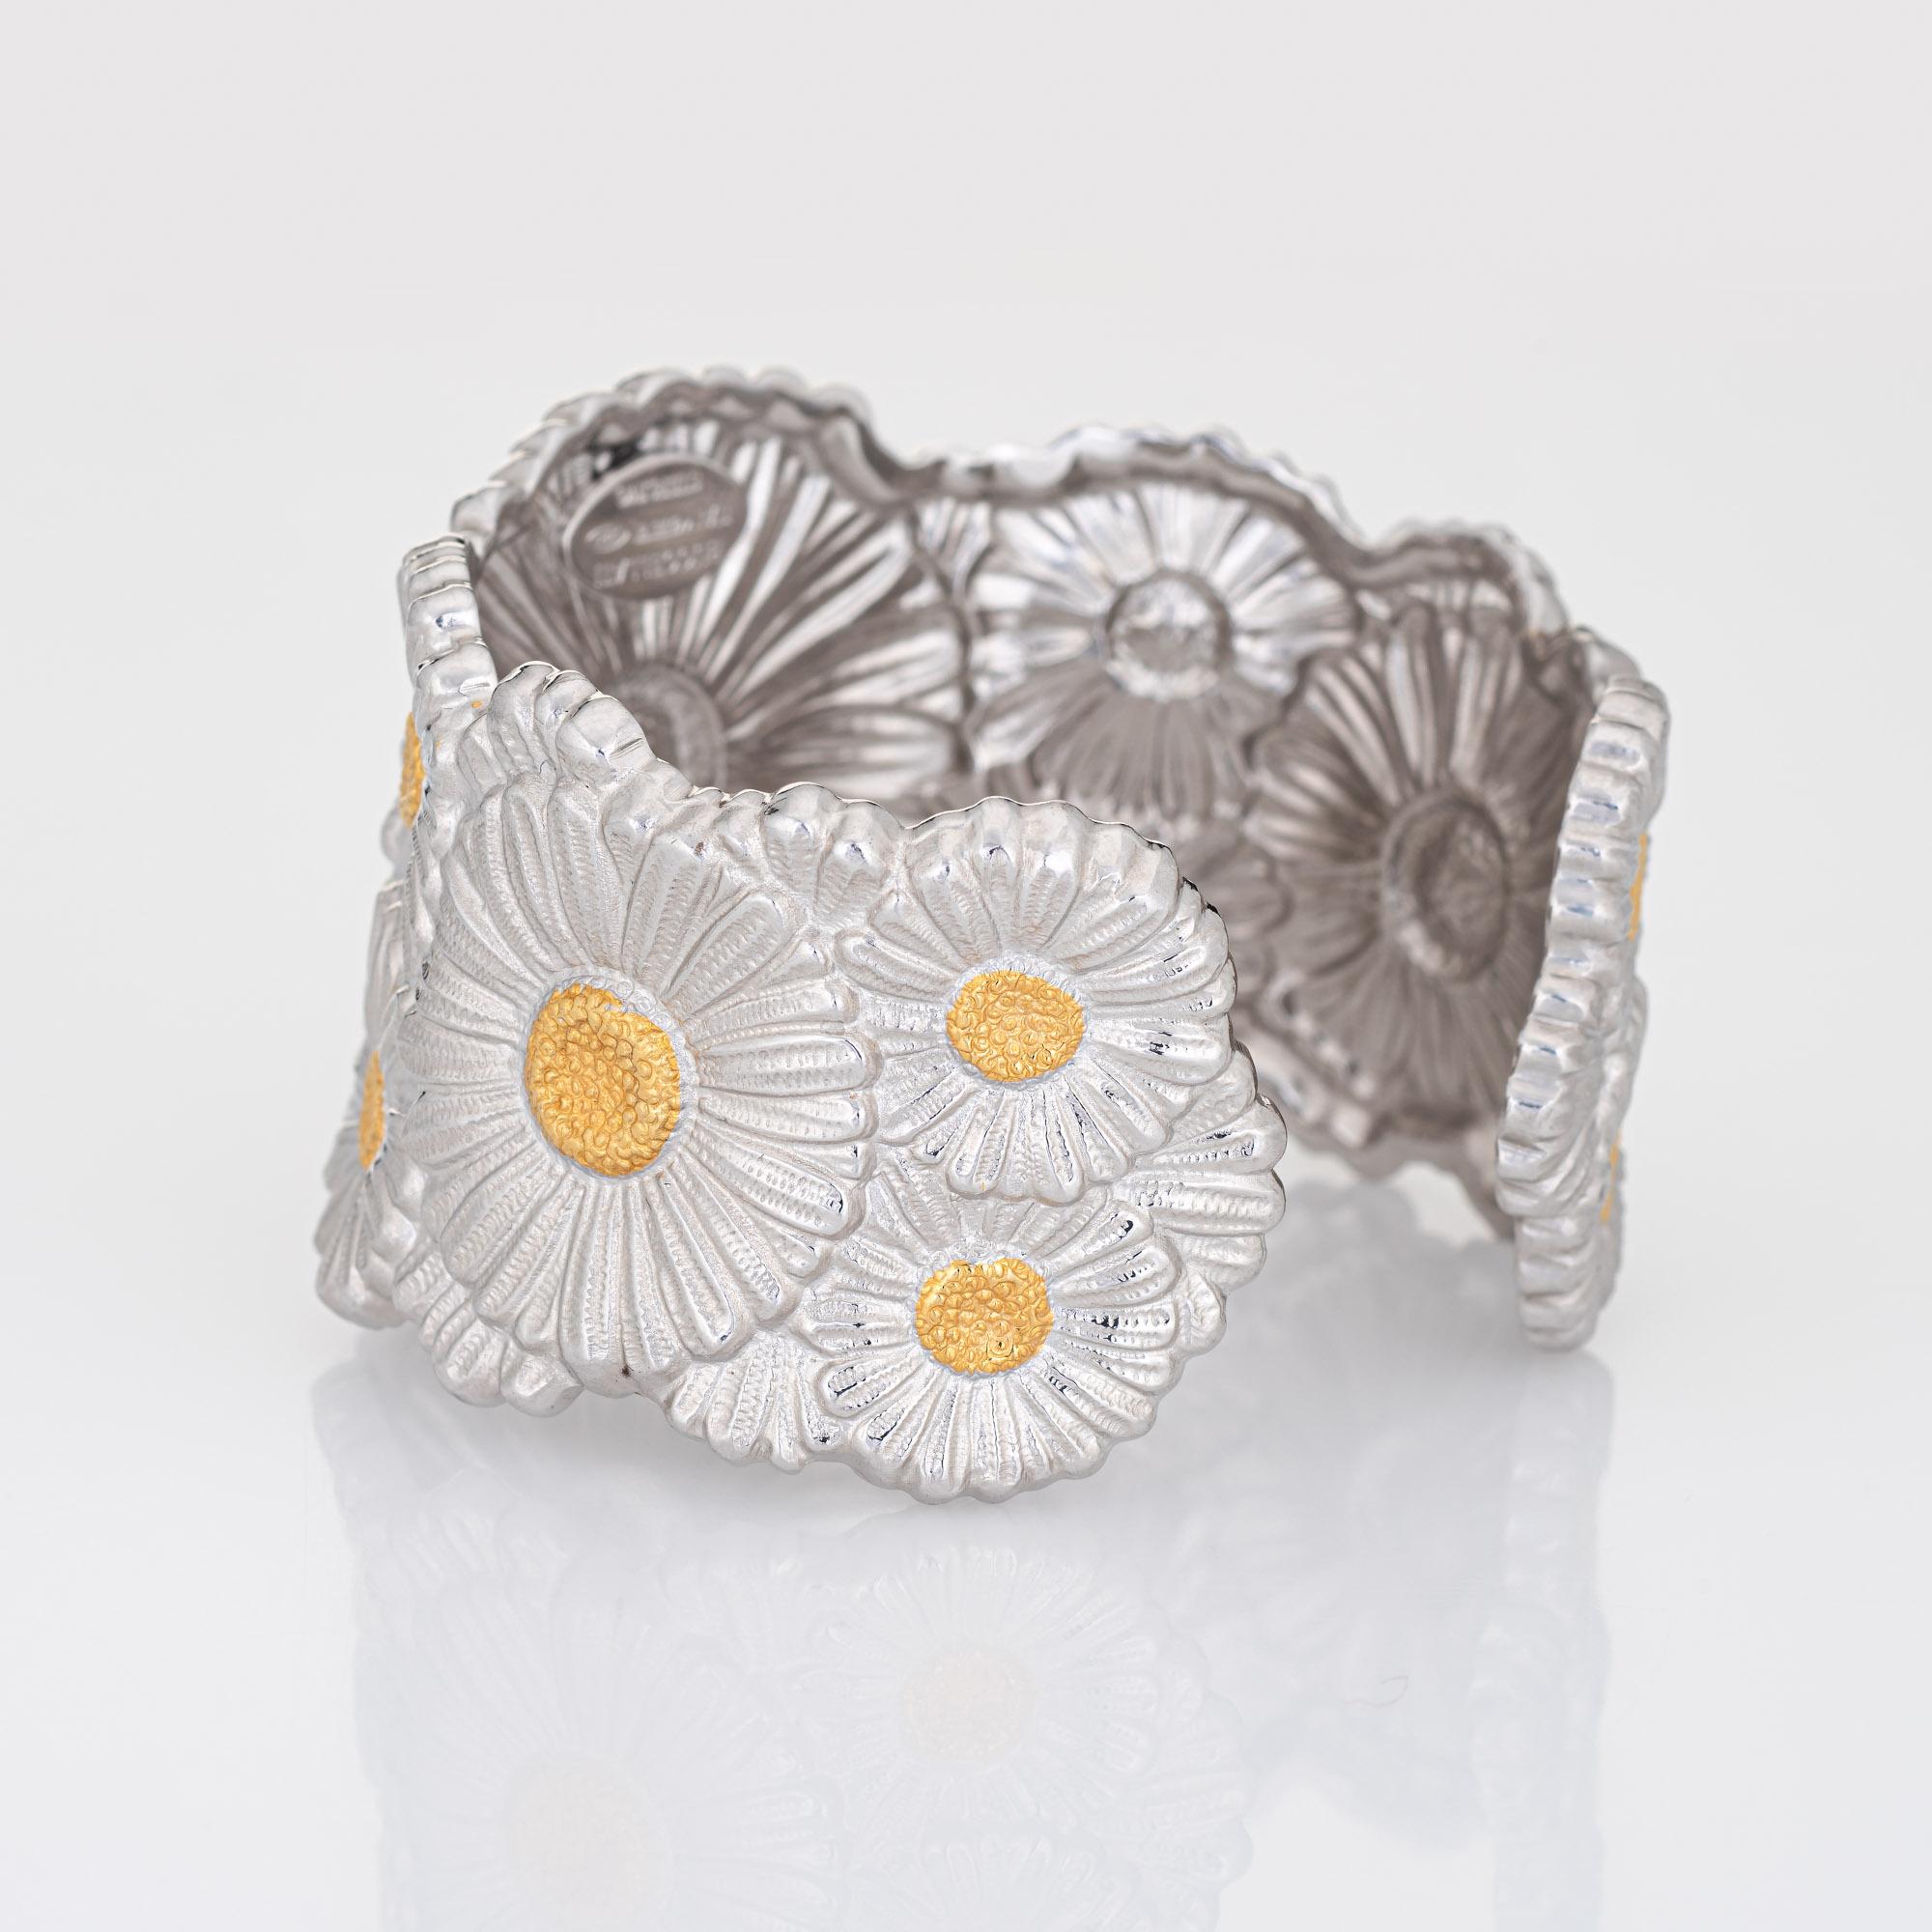 Stylish and finely detailed Buccellati flower cuff bracelet, crafted in sterling silver with gold plated accents.  

The elaborate cuff features daisy flowers with yellow gold plated centers. The Italian jewelry house, Buccellati, is famed for its